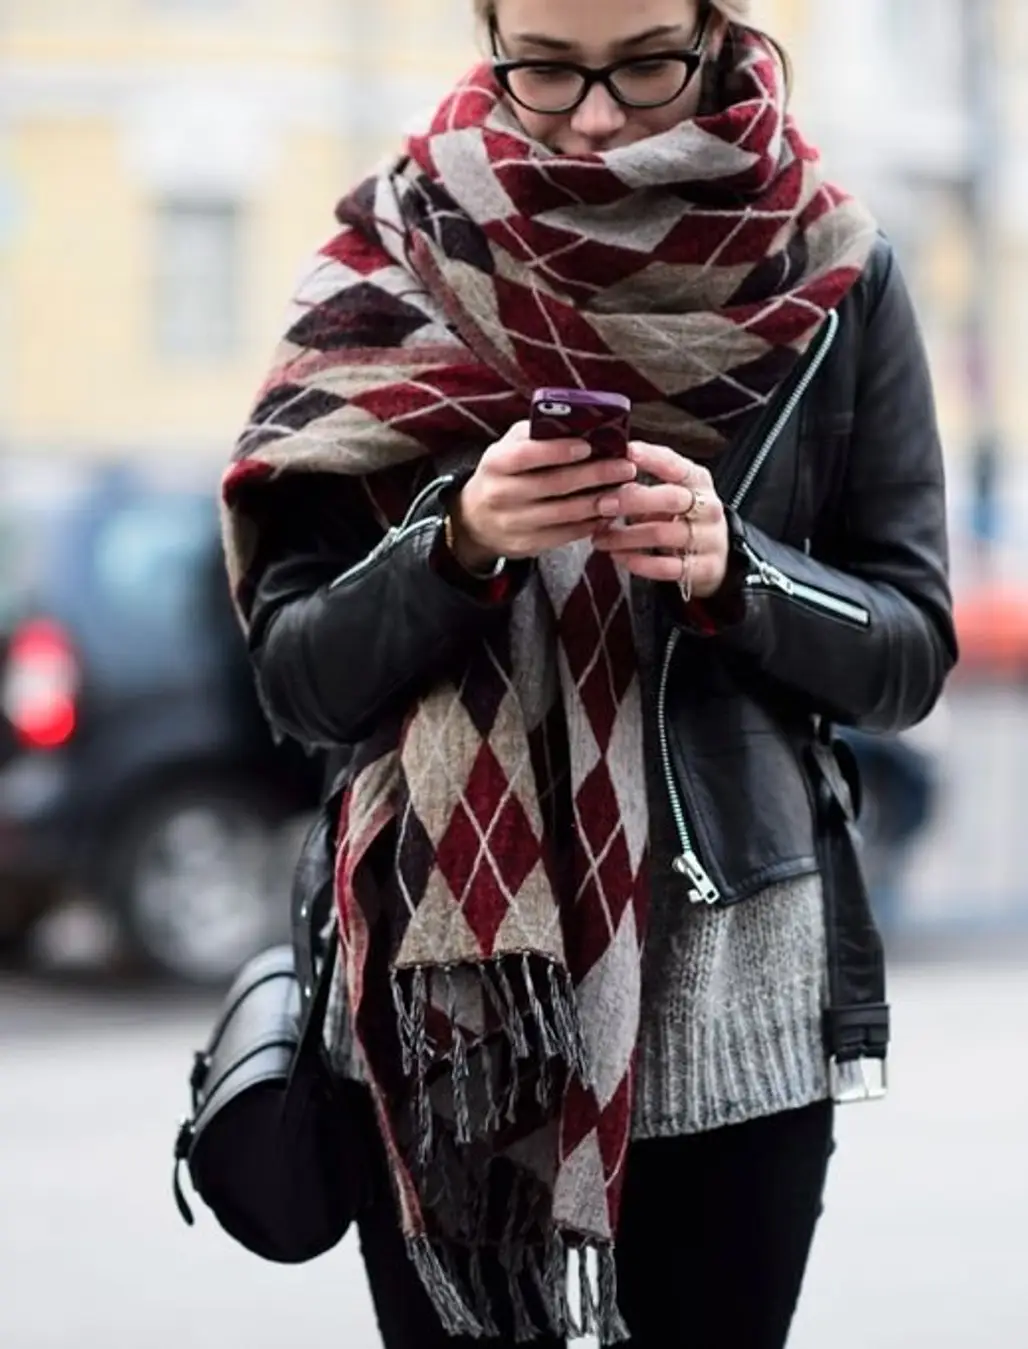 Recreate Some Adorable Street Style Outfits with Leg Warmers